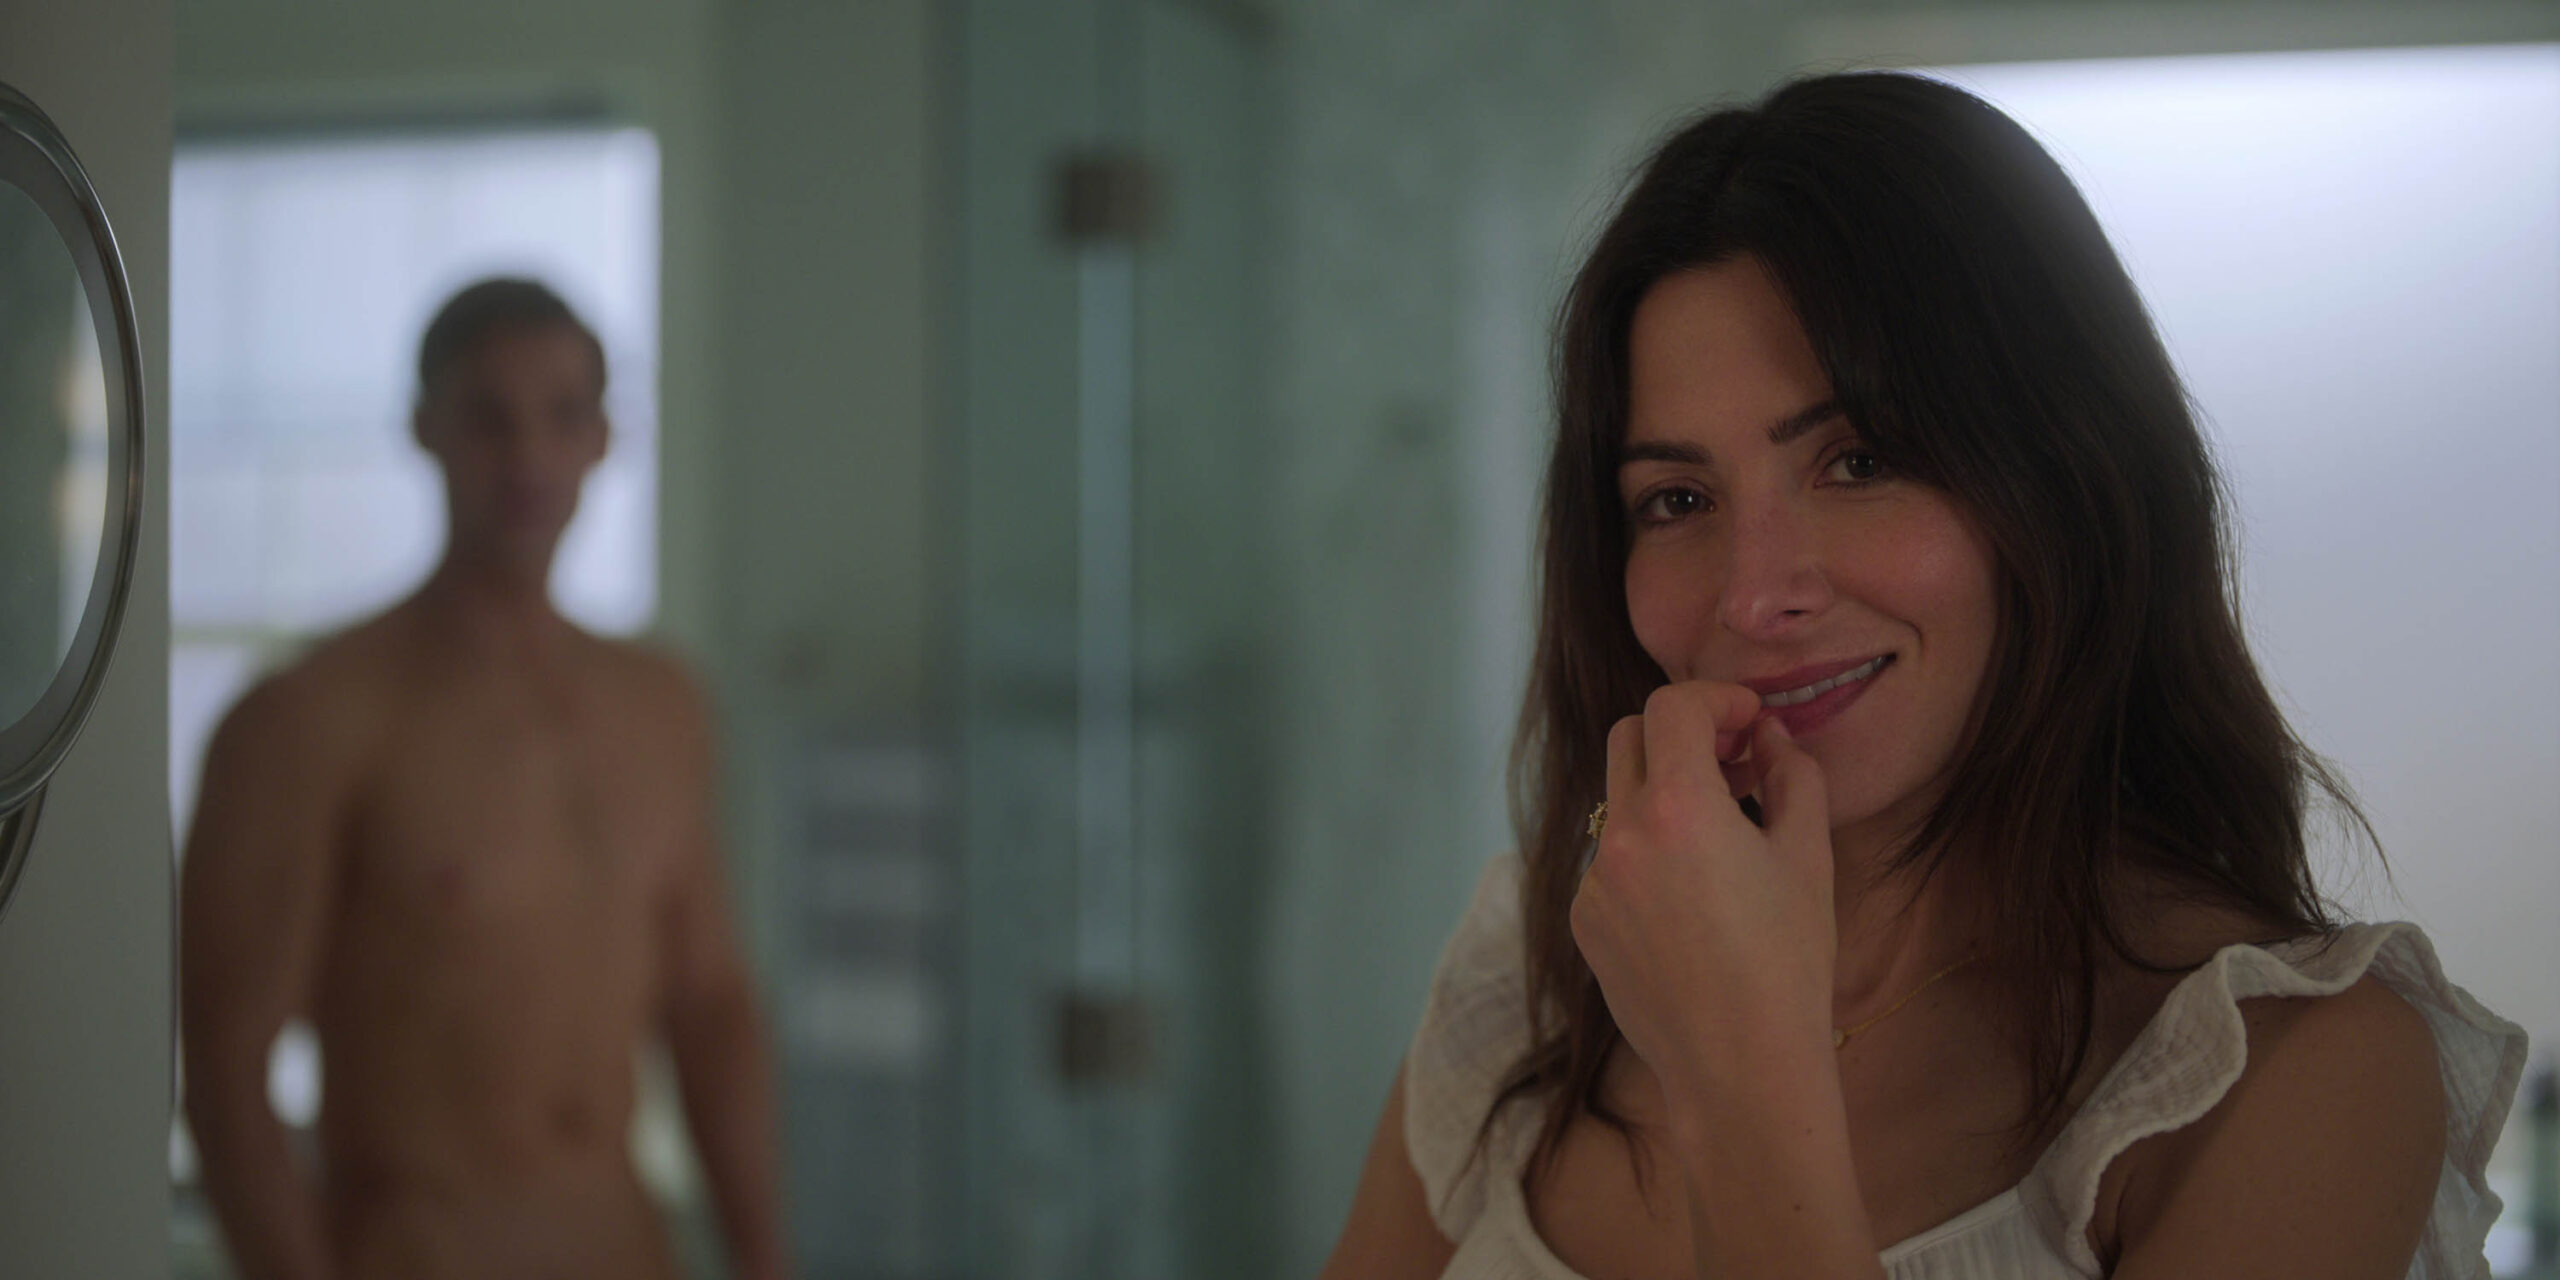 Sarah Shahi come Billie Connelly in Sex/Life 1x01 'The Wives Are in Connecticut' [credit: courtesy of Netflix]